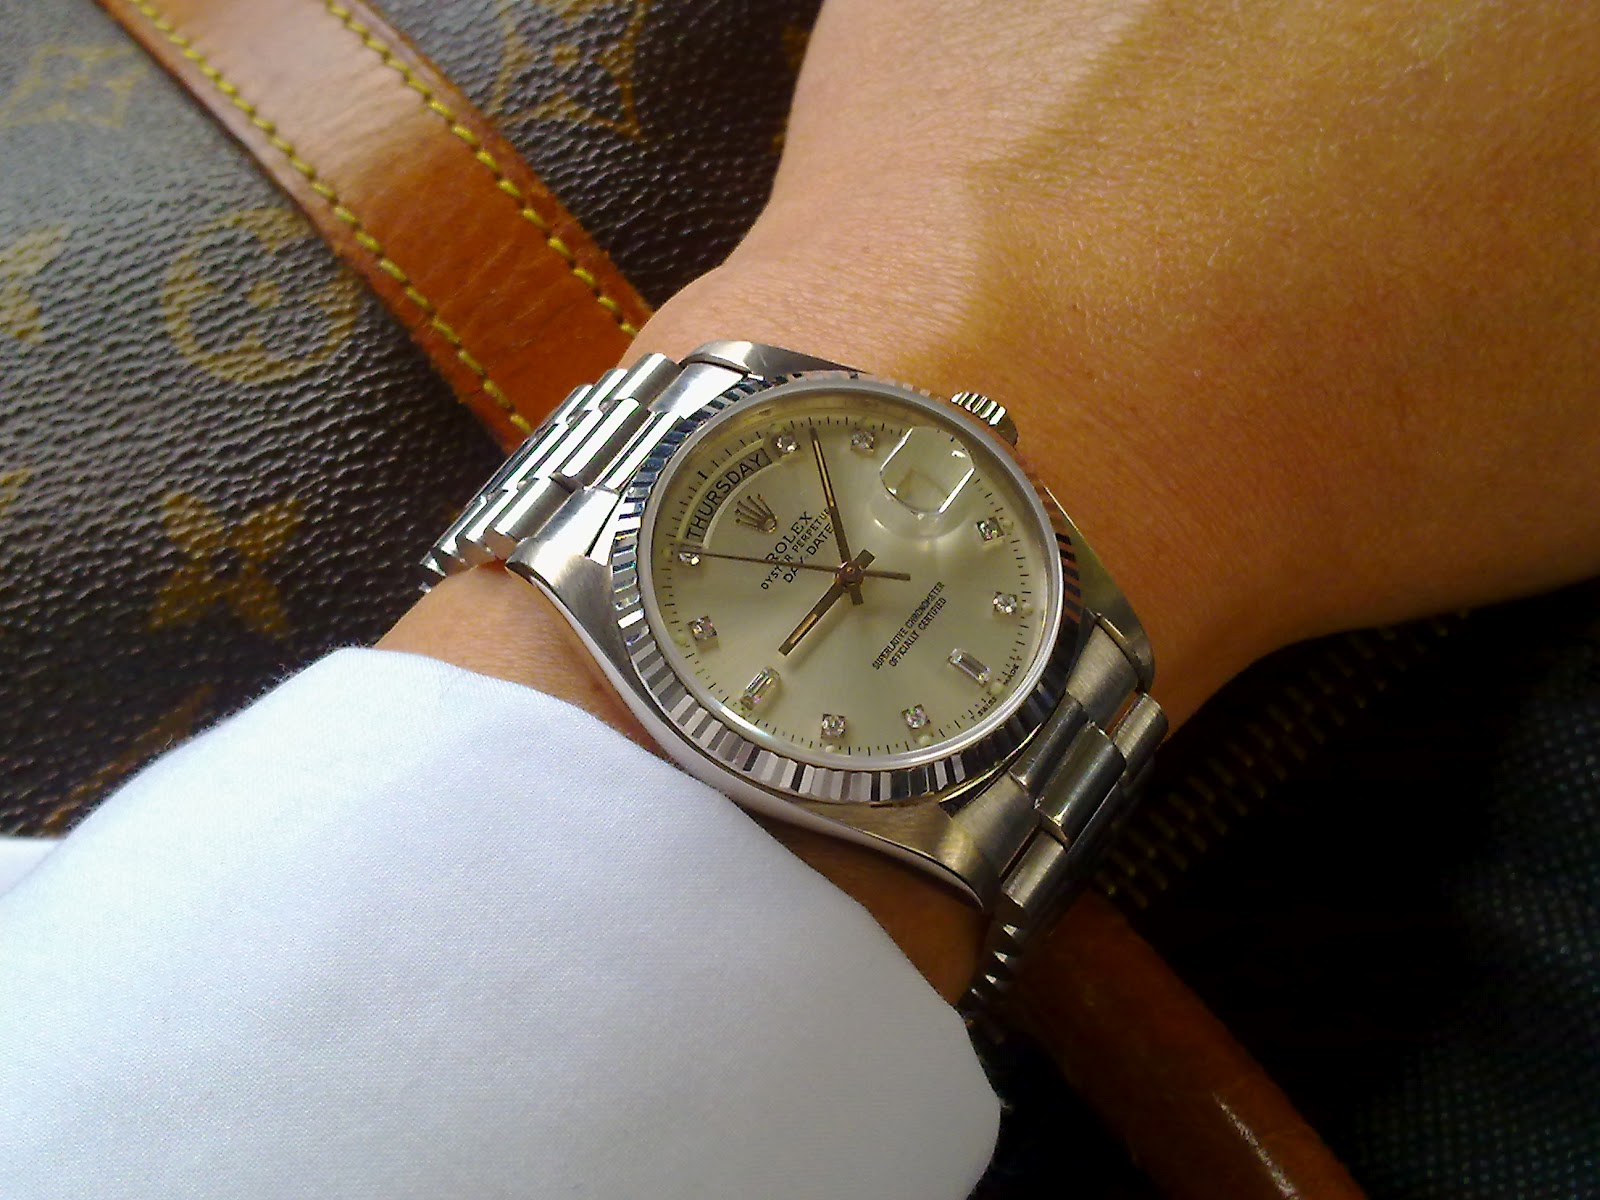 ... rolex i am not trying to saying everyone likes rolex as i know at